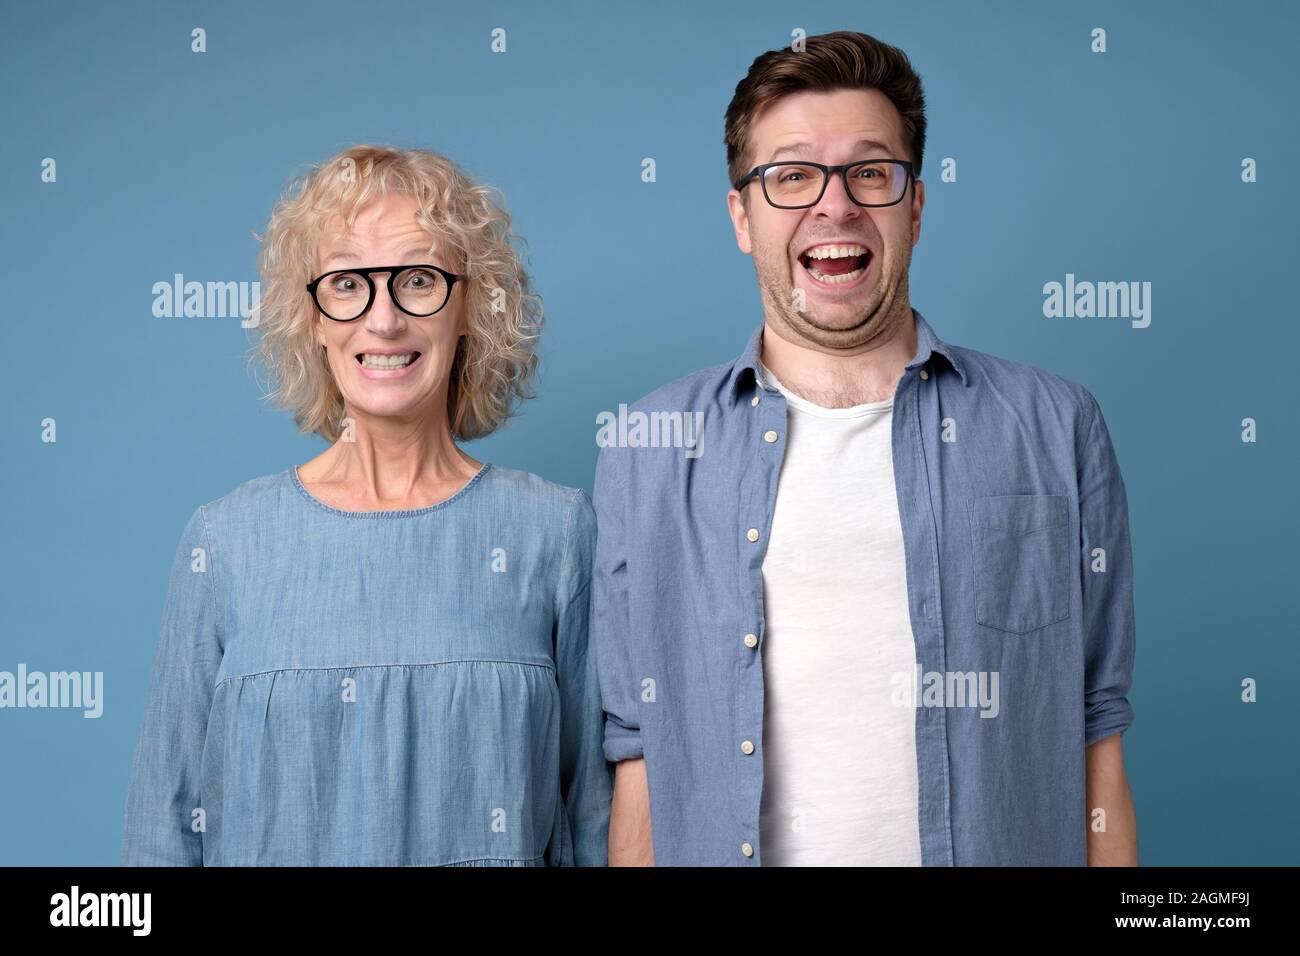 Positive coworkers with funny happy expressions, show white teeth, smile broadly Stock Photo